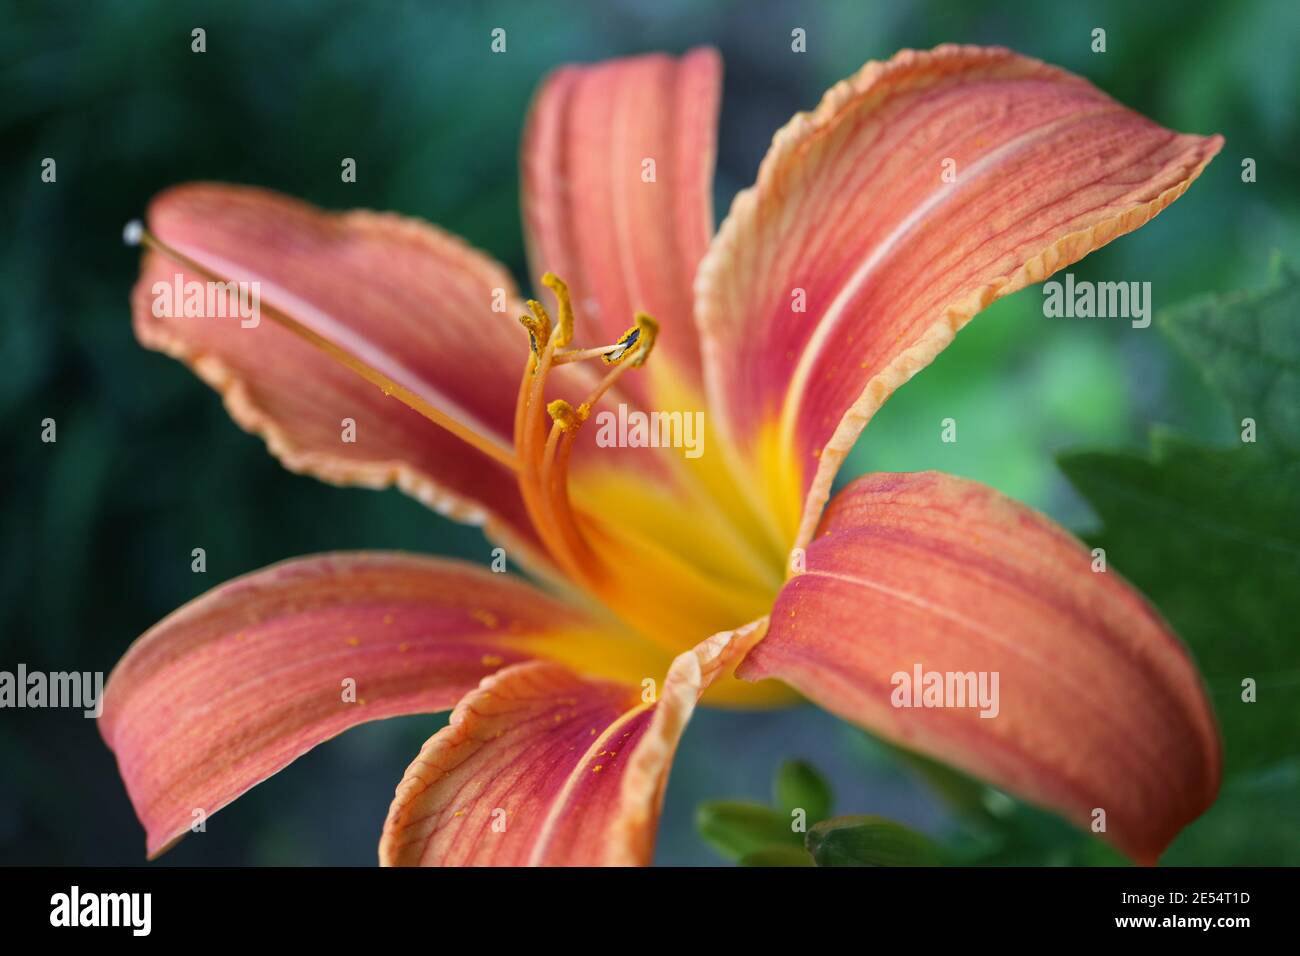 Orange Daylily with long stamens , Hemerocallis Fulva, Daylily in the garden, flower head macro, beauty in nature, floral photo, macro photography Stock Photo